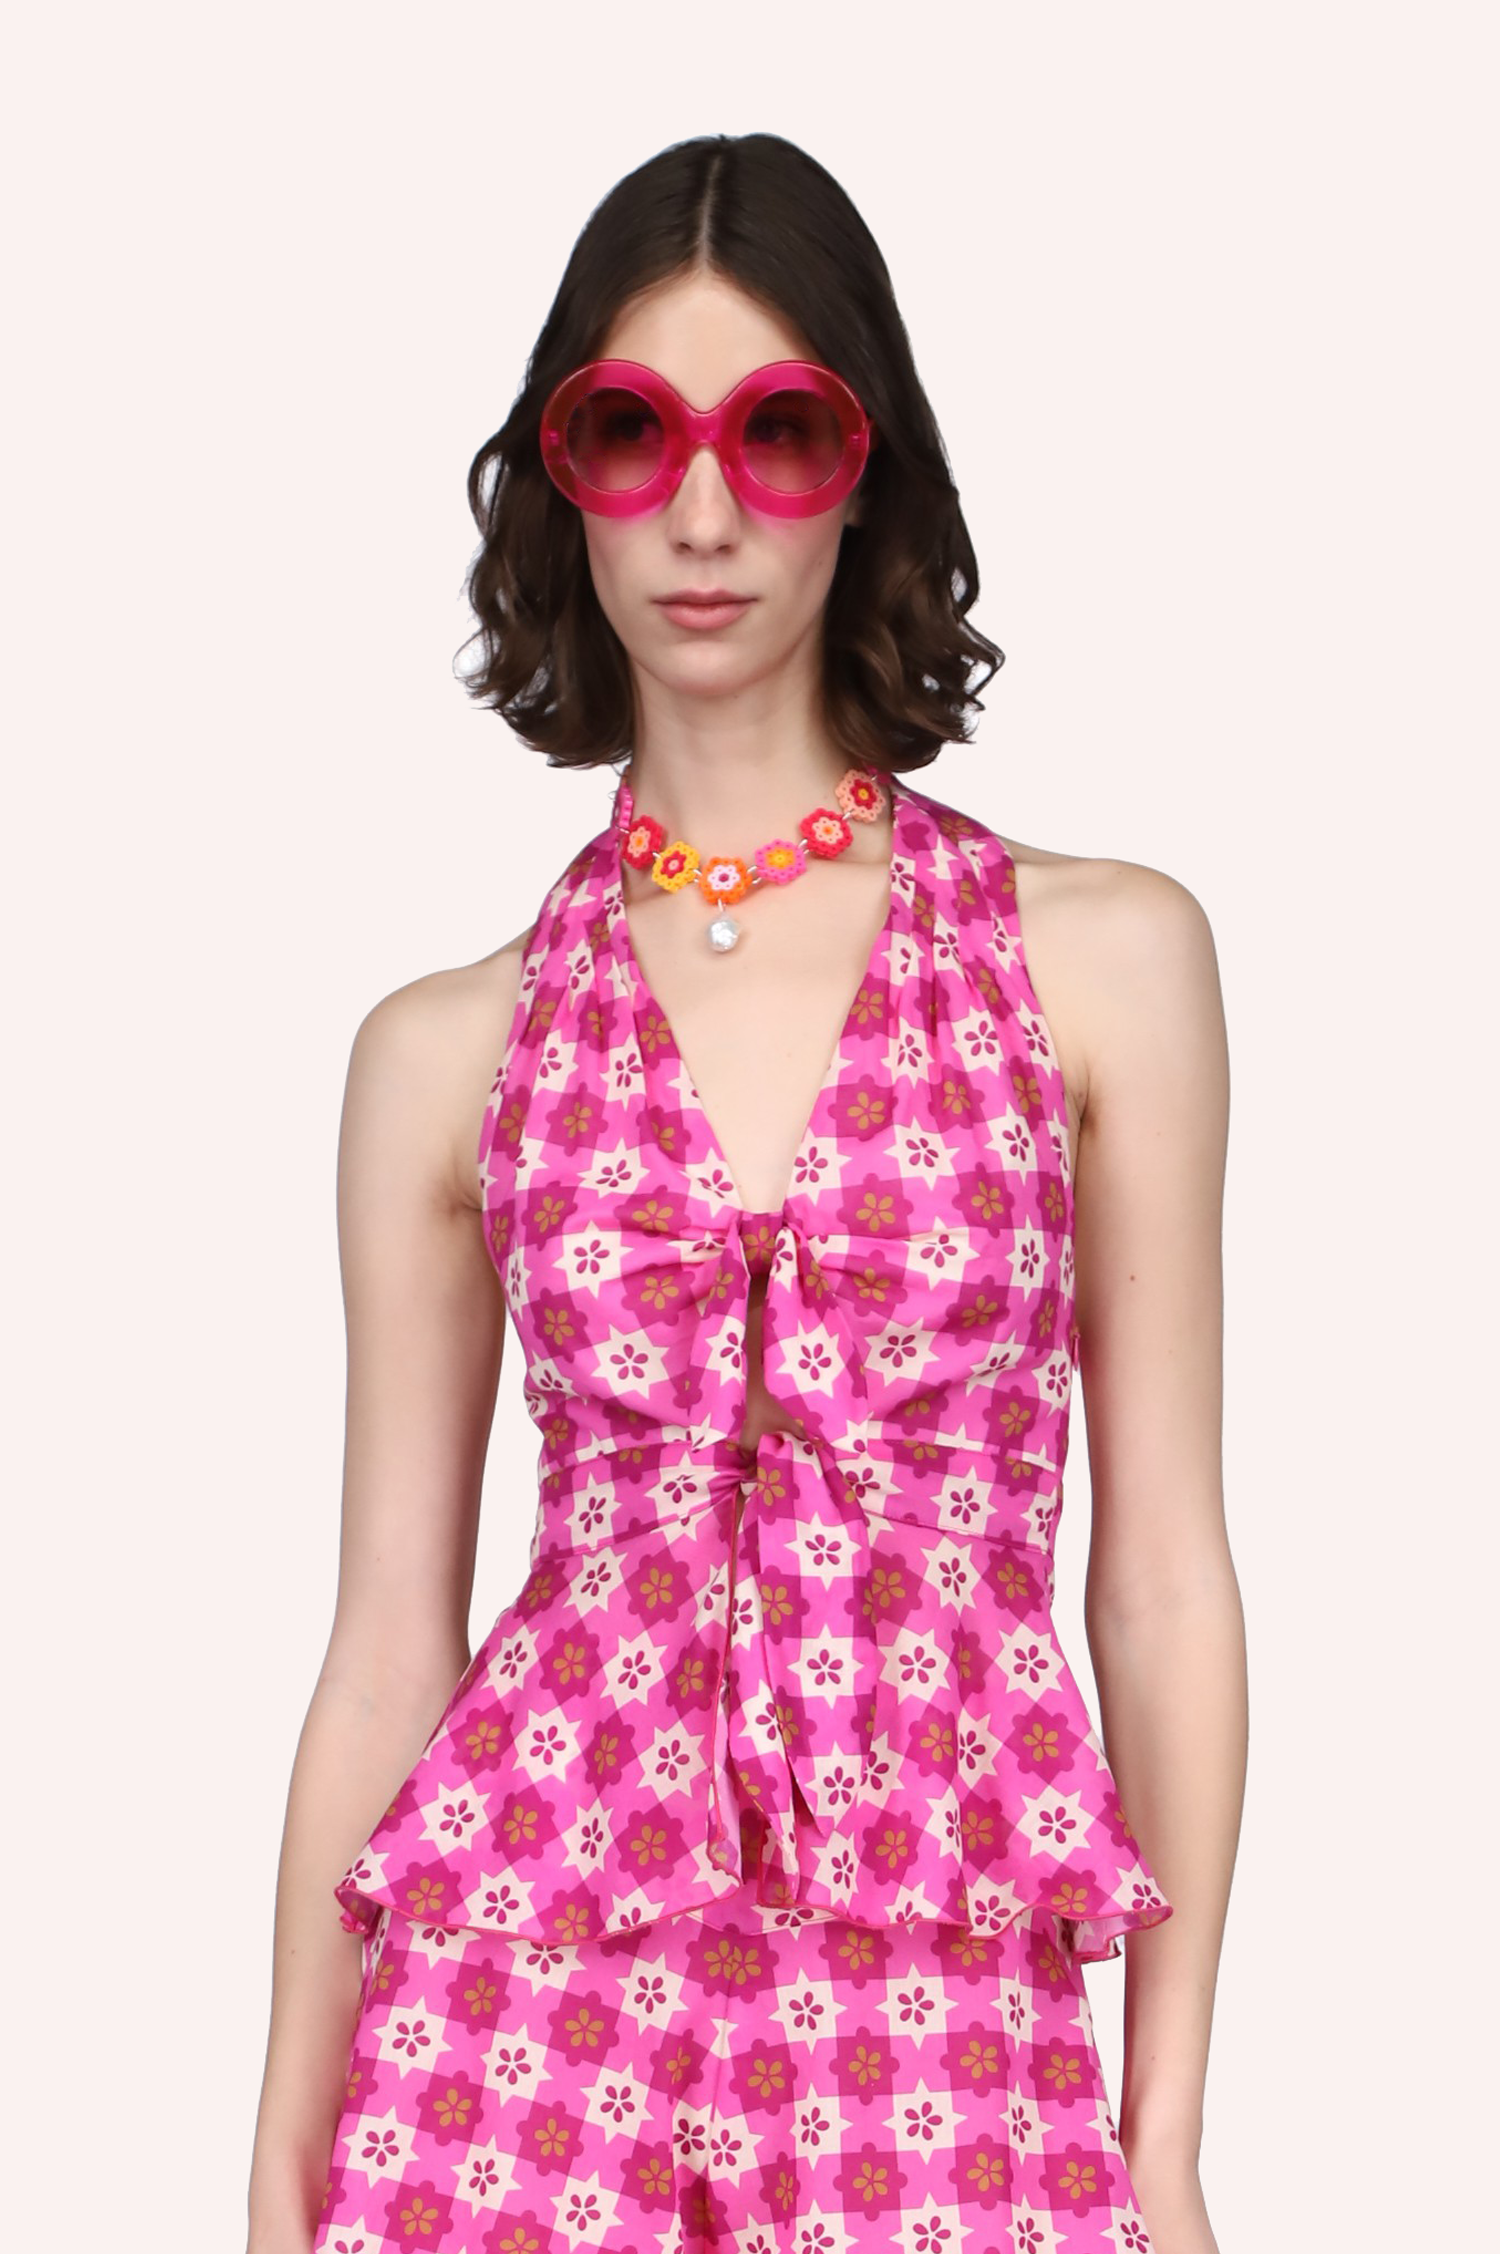 Utopian Gingham Halter Top Pink features a pink and white star-shaped pattern